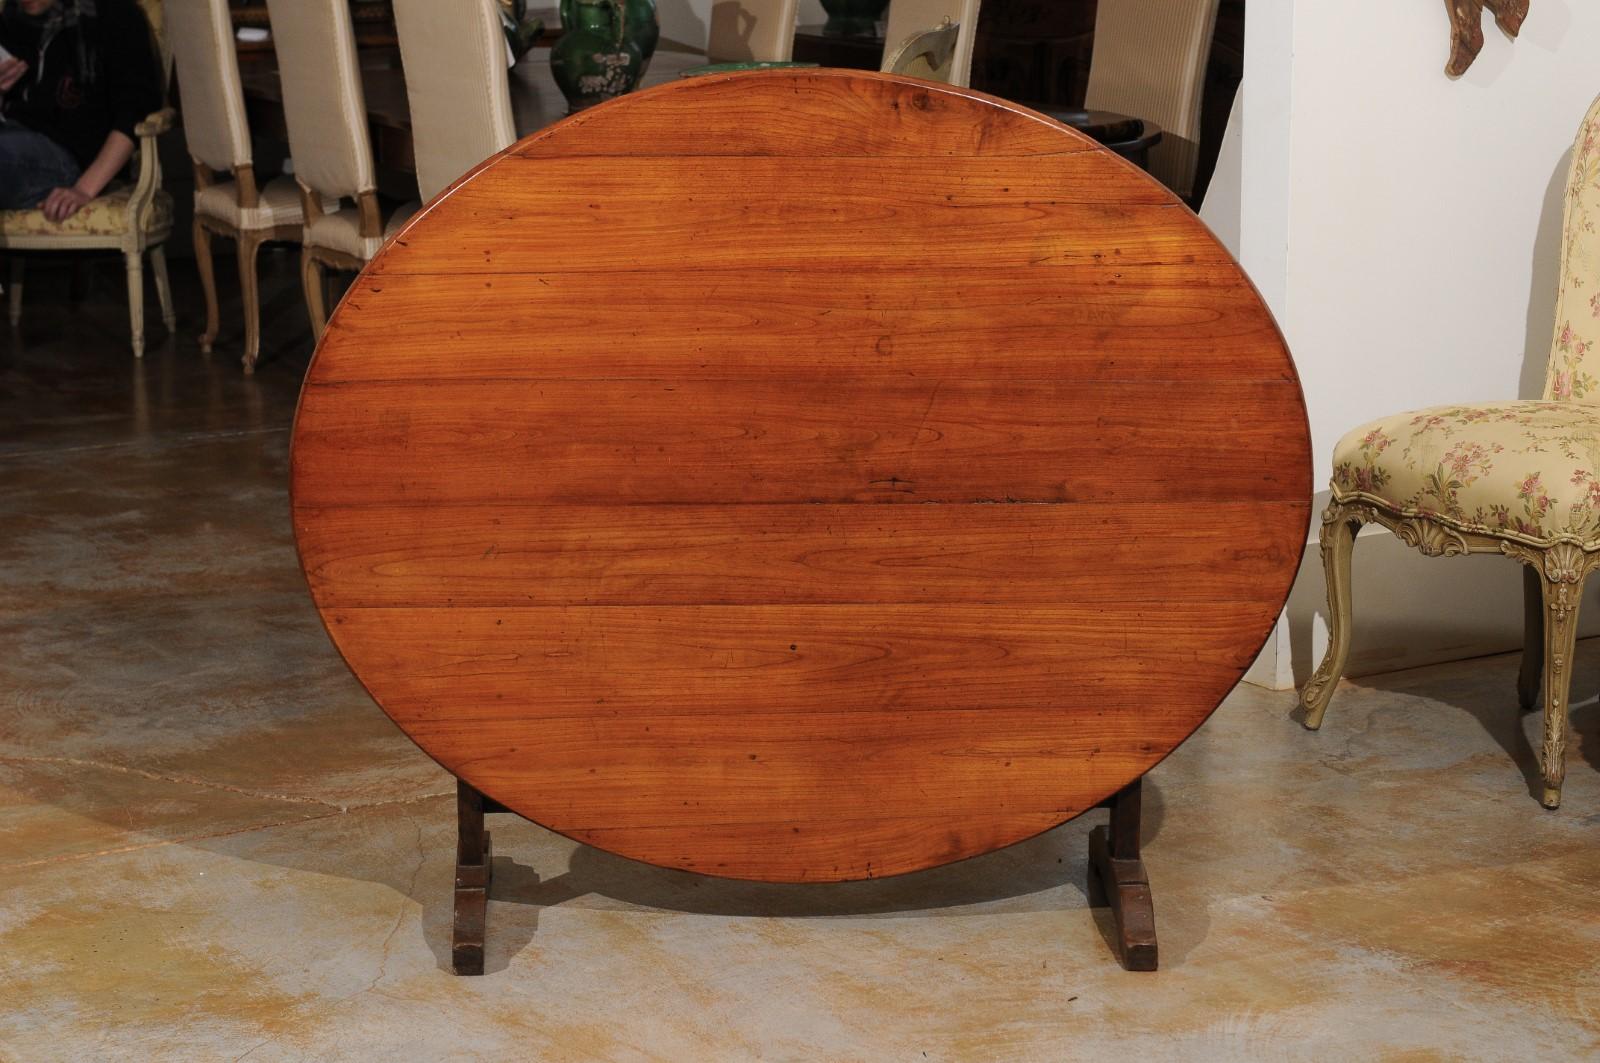 A French oval wine tasting table from the late 19th century, with tilt-top and butterfly wedge. Born in France at the end of the reign of France's last Emperor Napoleon III, this wine tasting table features an oval tilt-top, sitting above a trestle